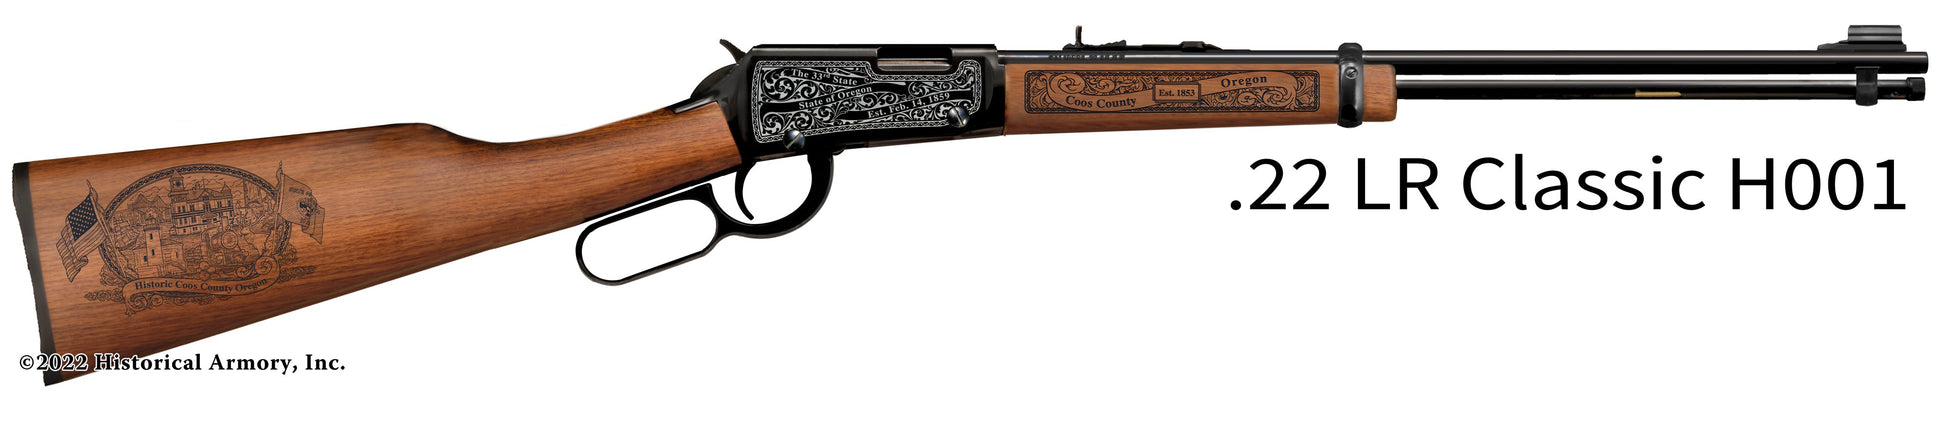 Coos County Oregon Engraved Henry H001 Rifle